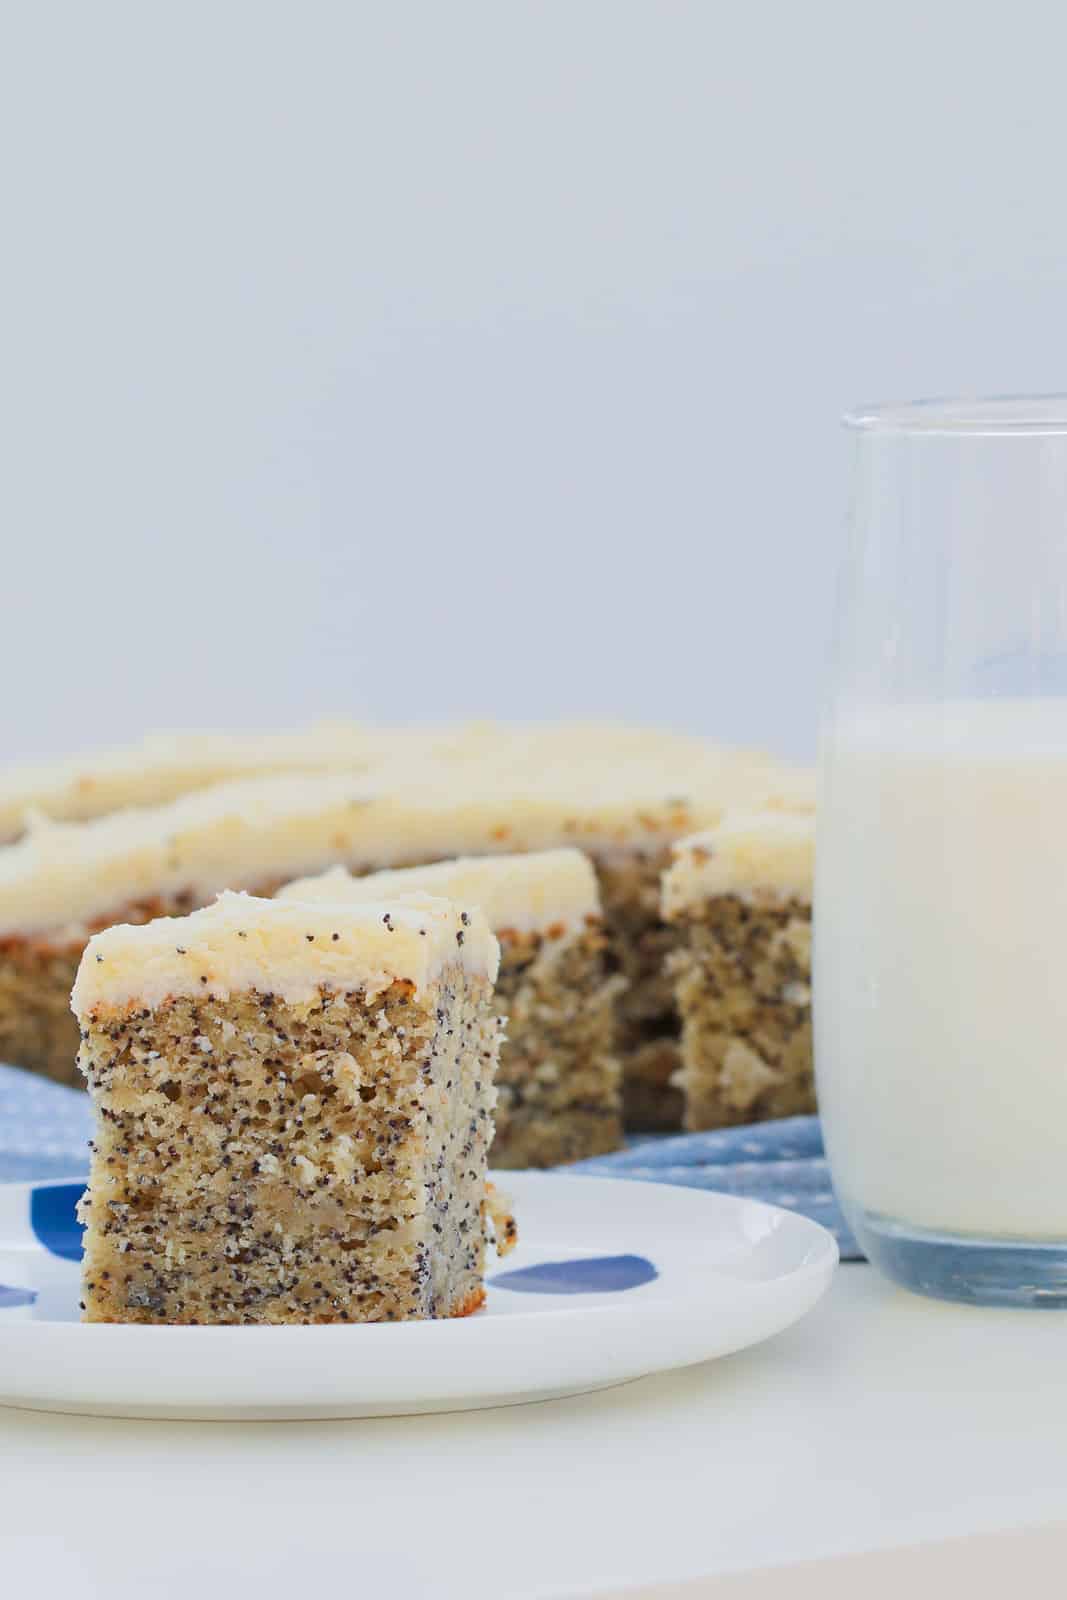 A piece of frosted banana poppyseed cake on a white and blue plate, with the rest of the sliced cake blurred in the background